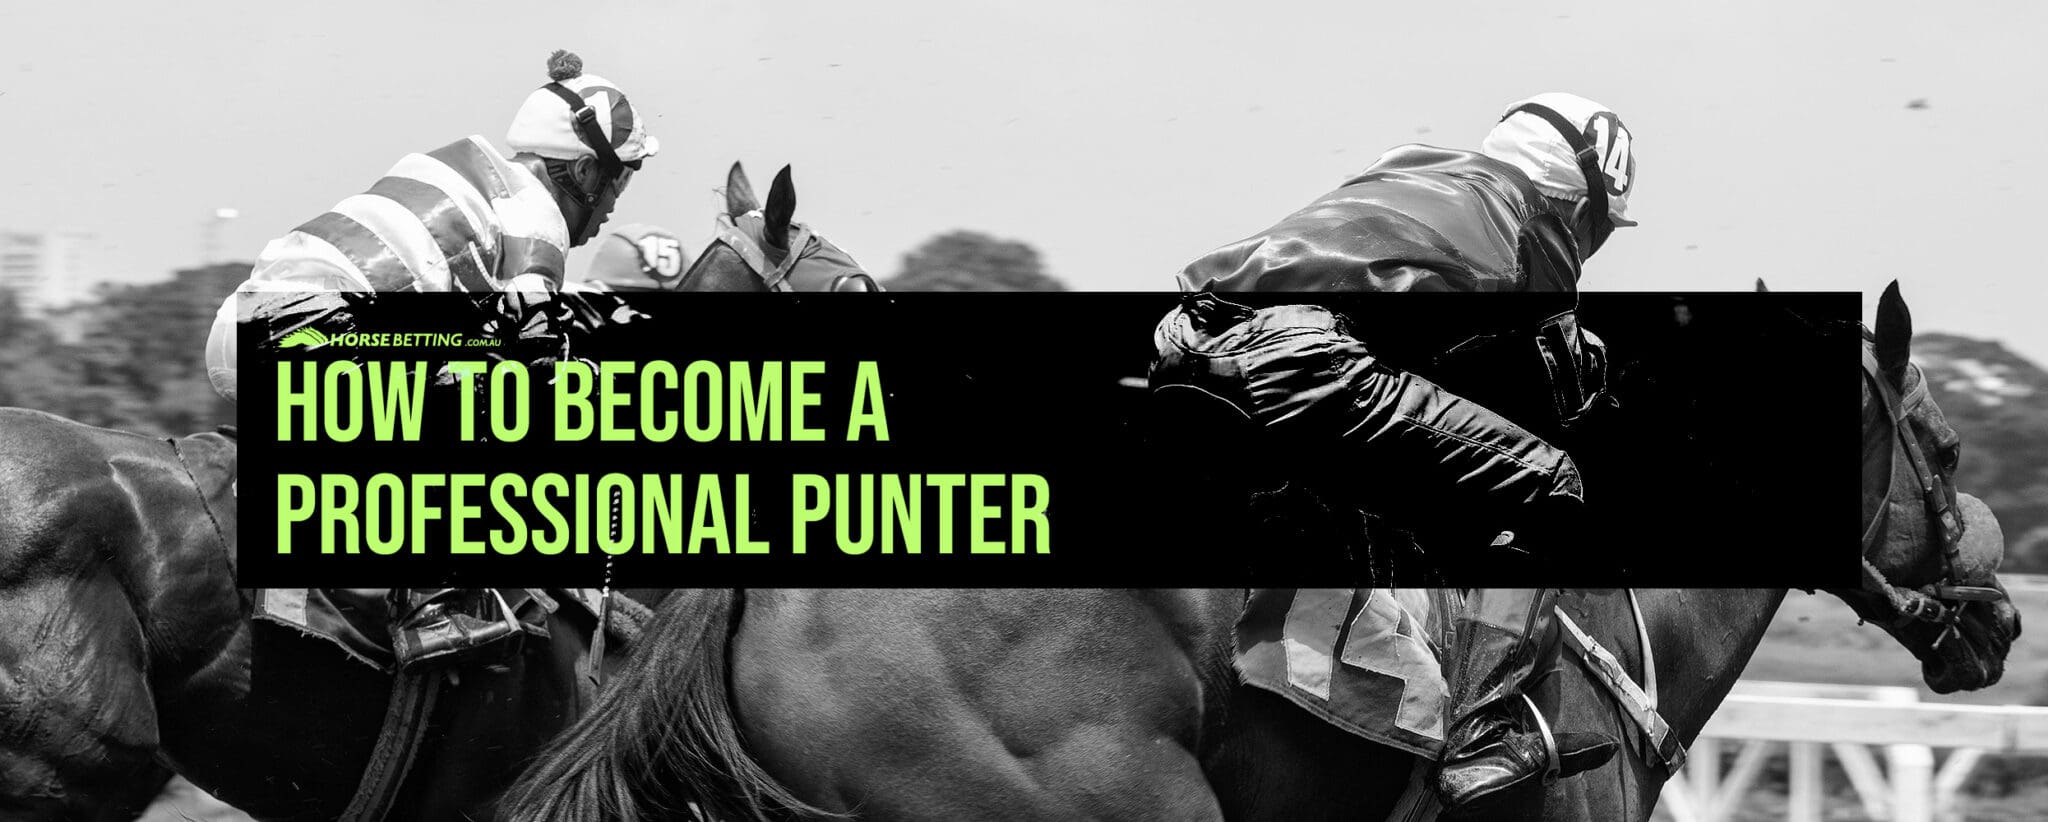 How to become a professional punter